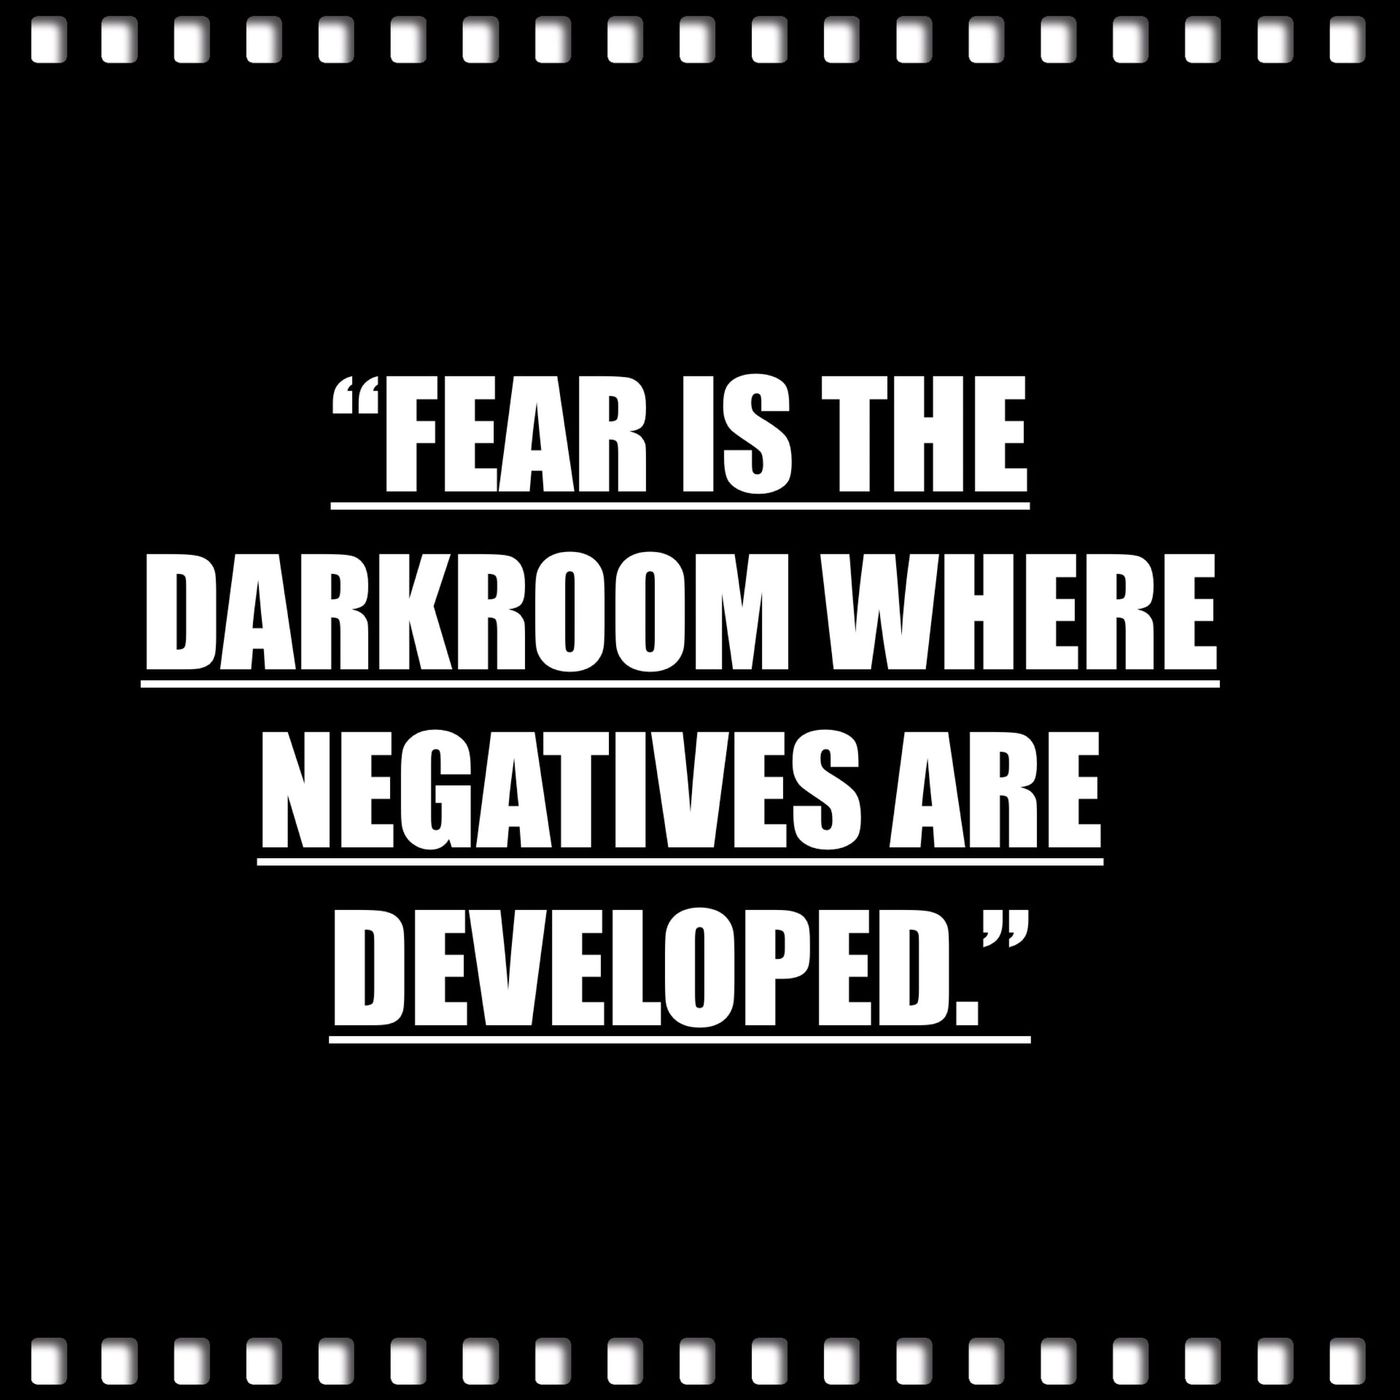 Ep 48 "Fear is the DarkRoom where Negatives are Developed"